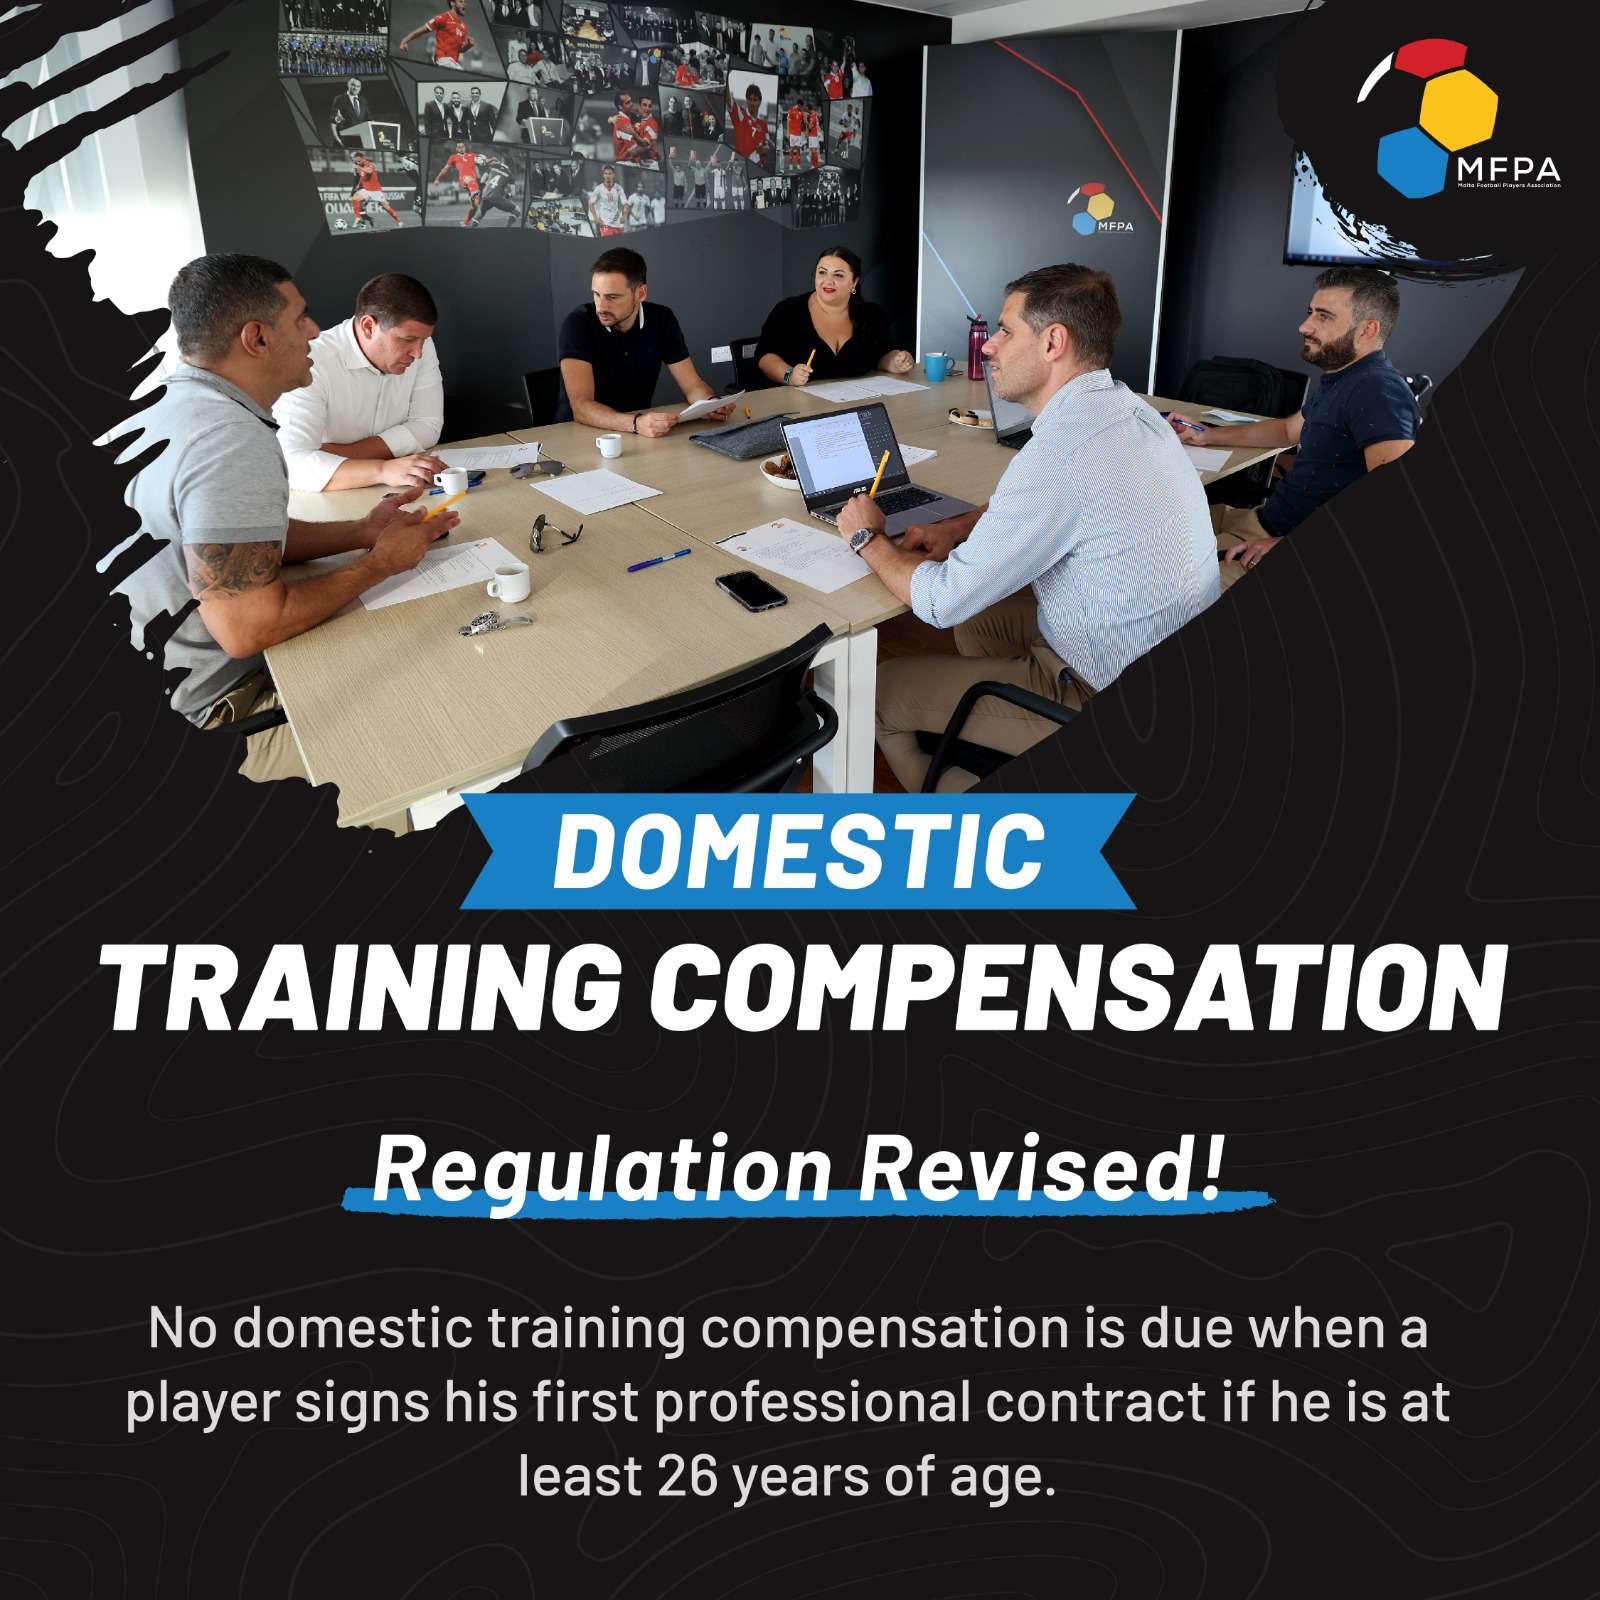 Changes in training compensation rules